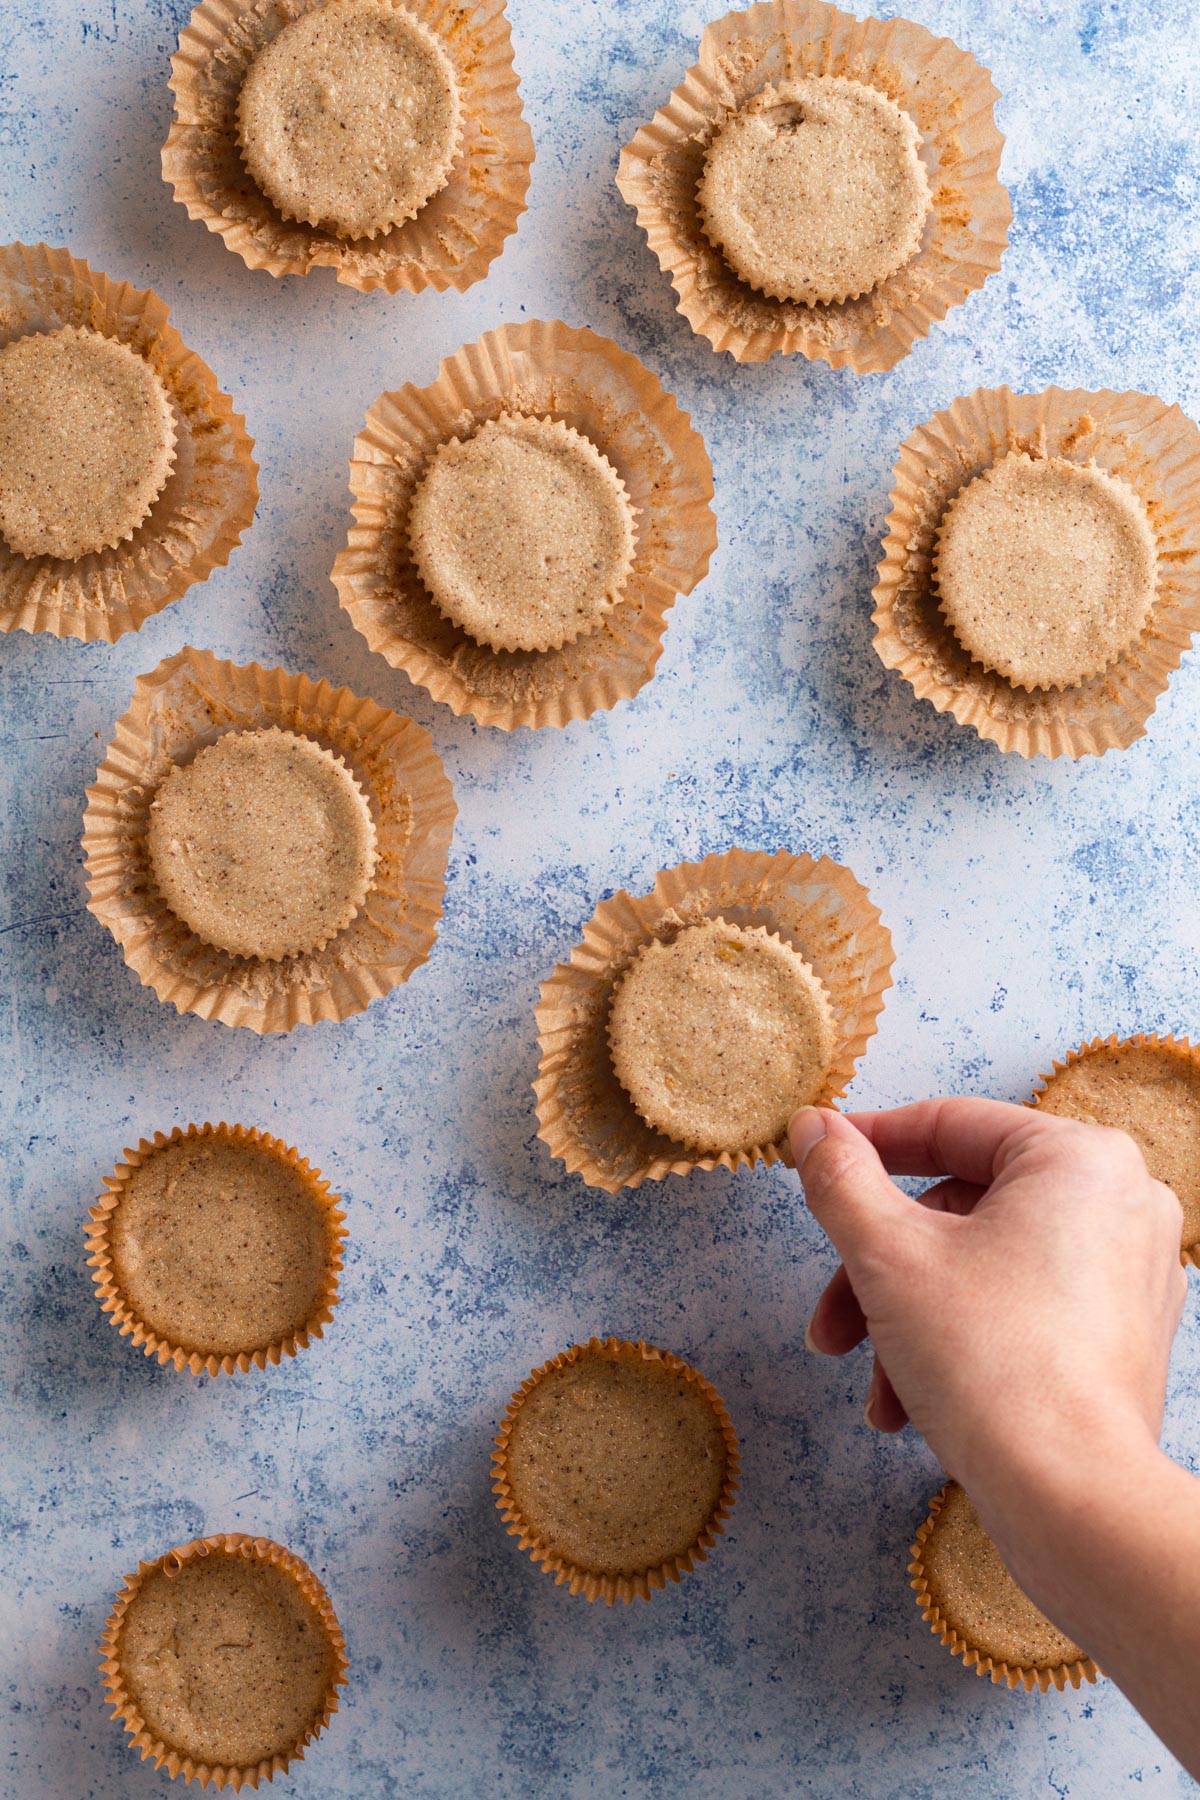 Hand removing muffin liners from chilled cheesecakes.